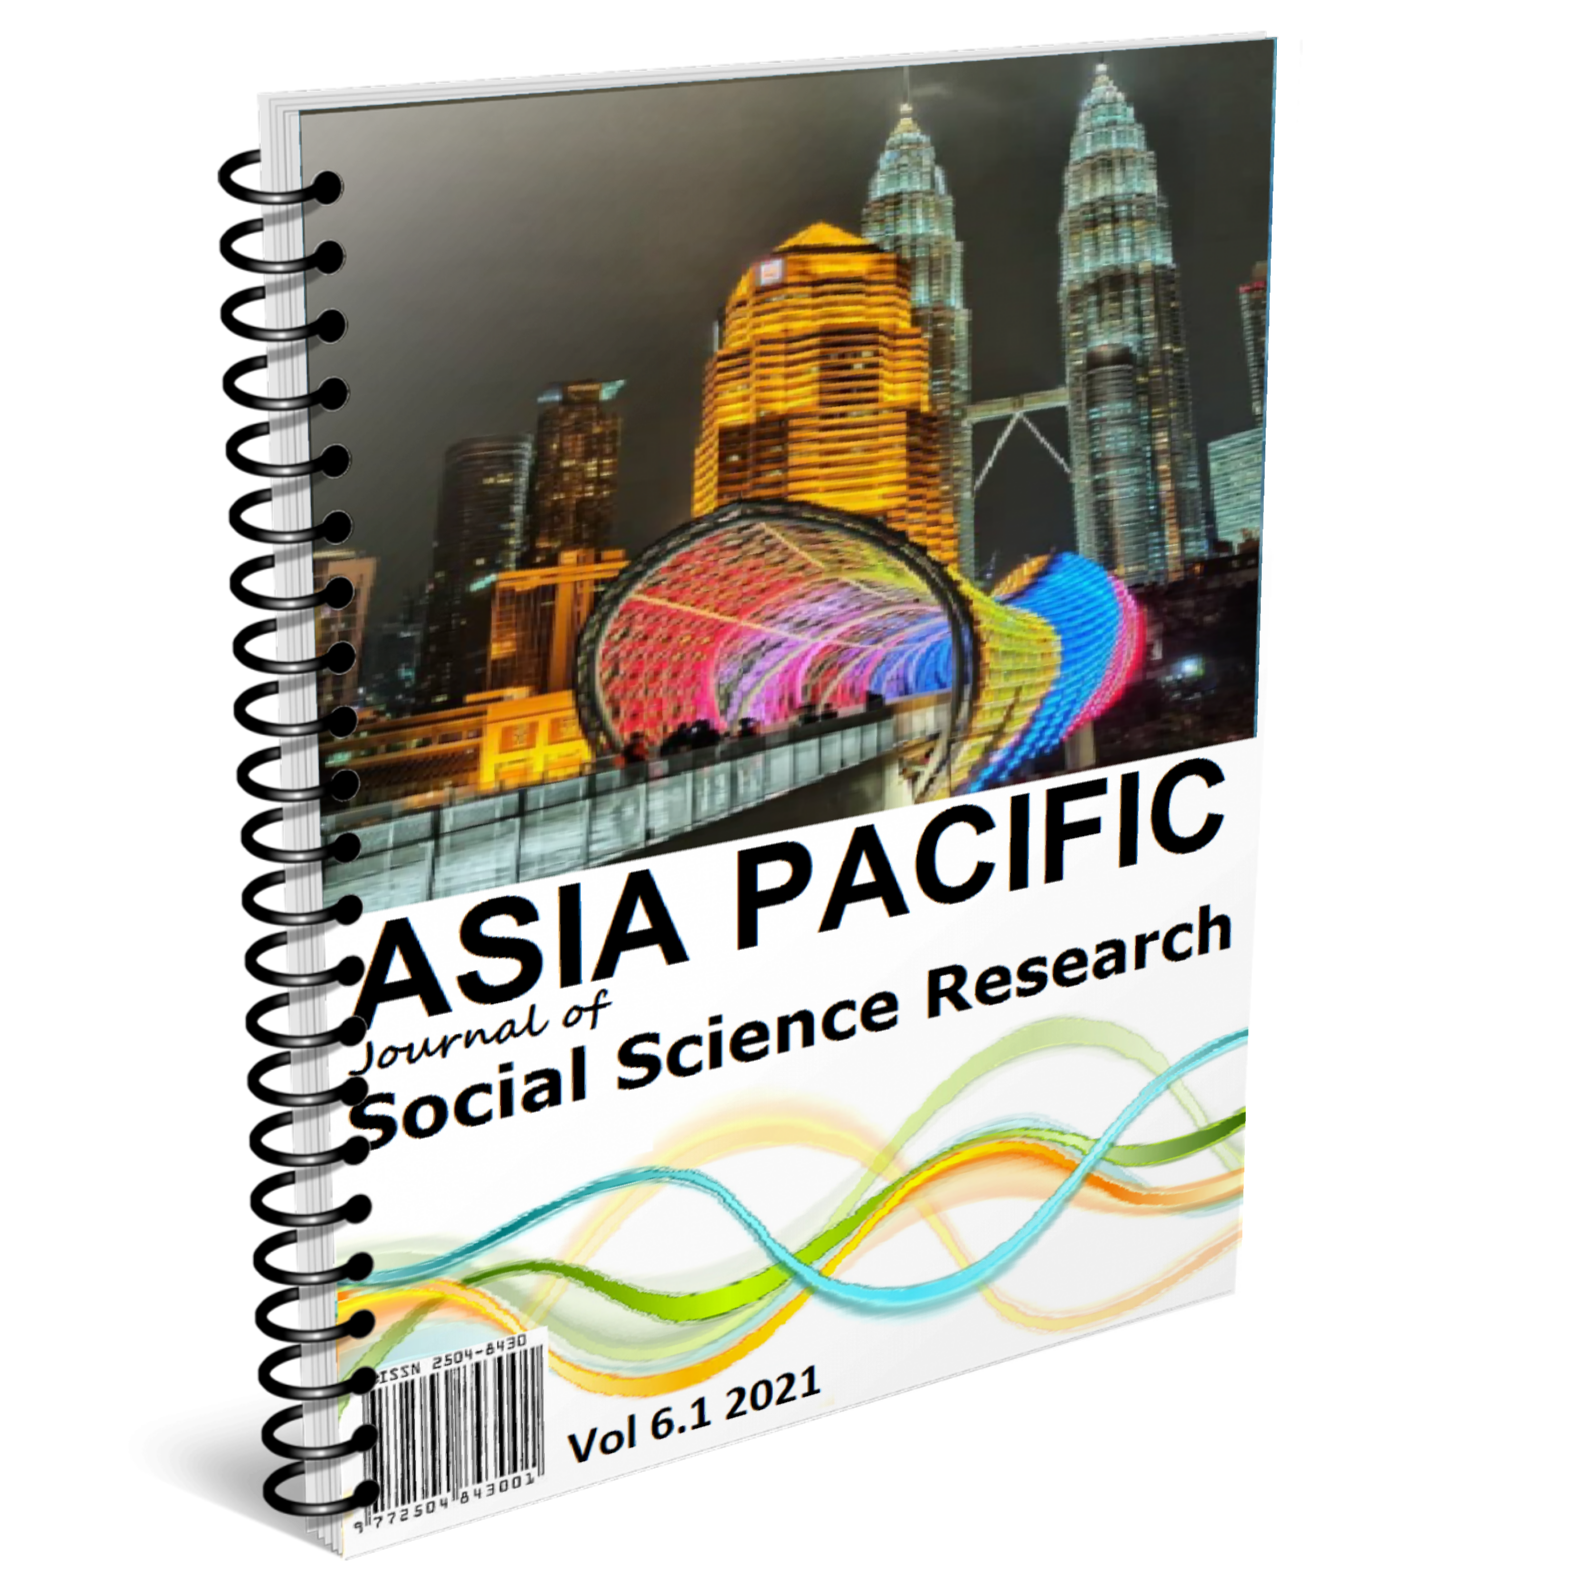 Asia Pacific Journal of Social Science Research